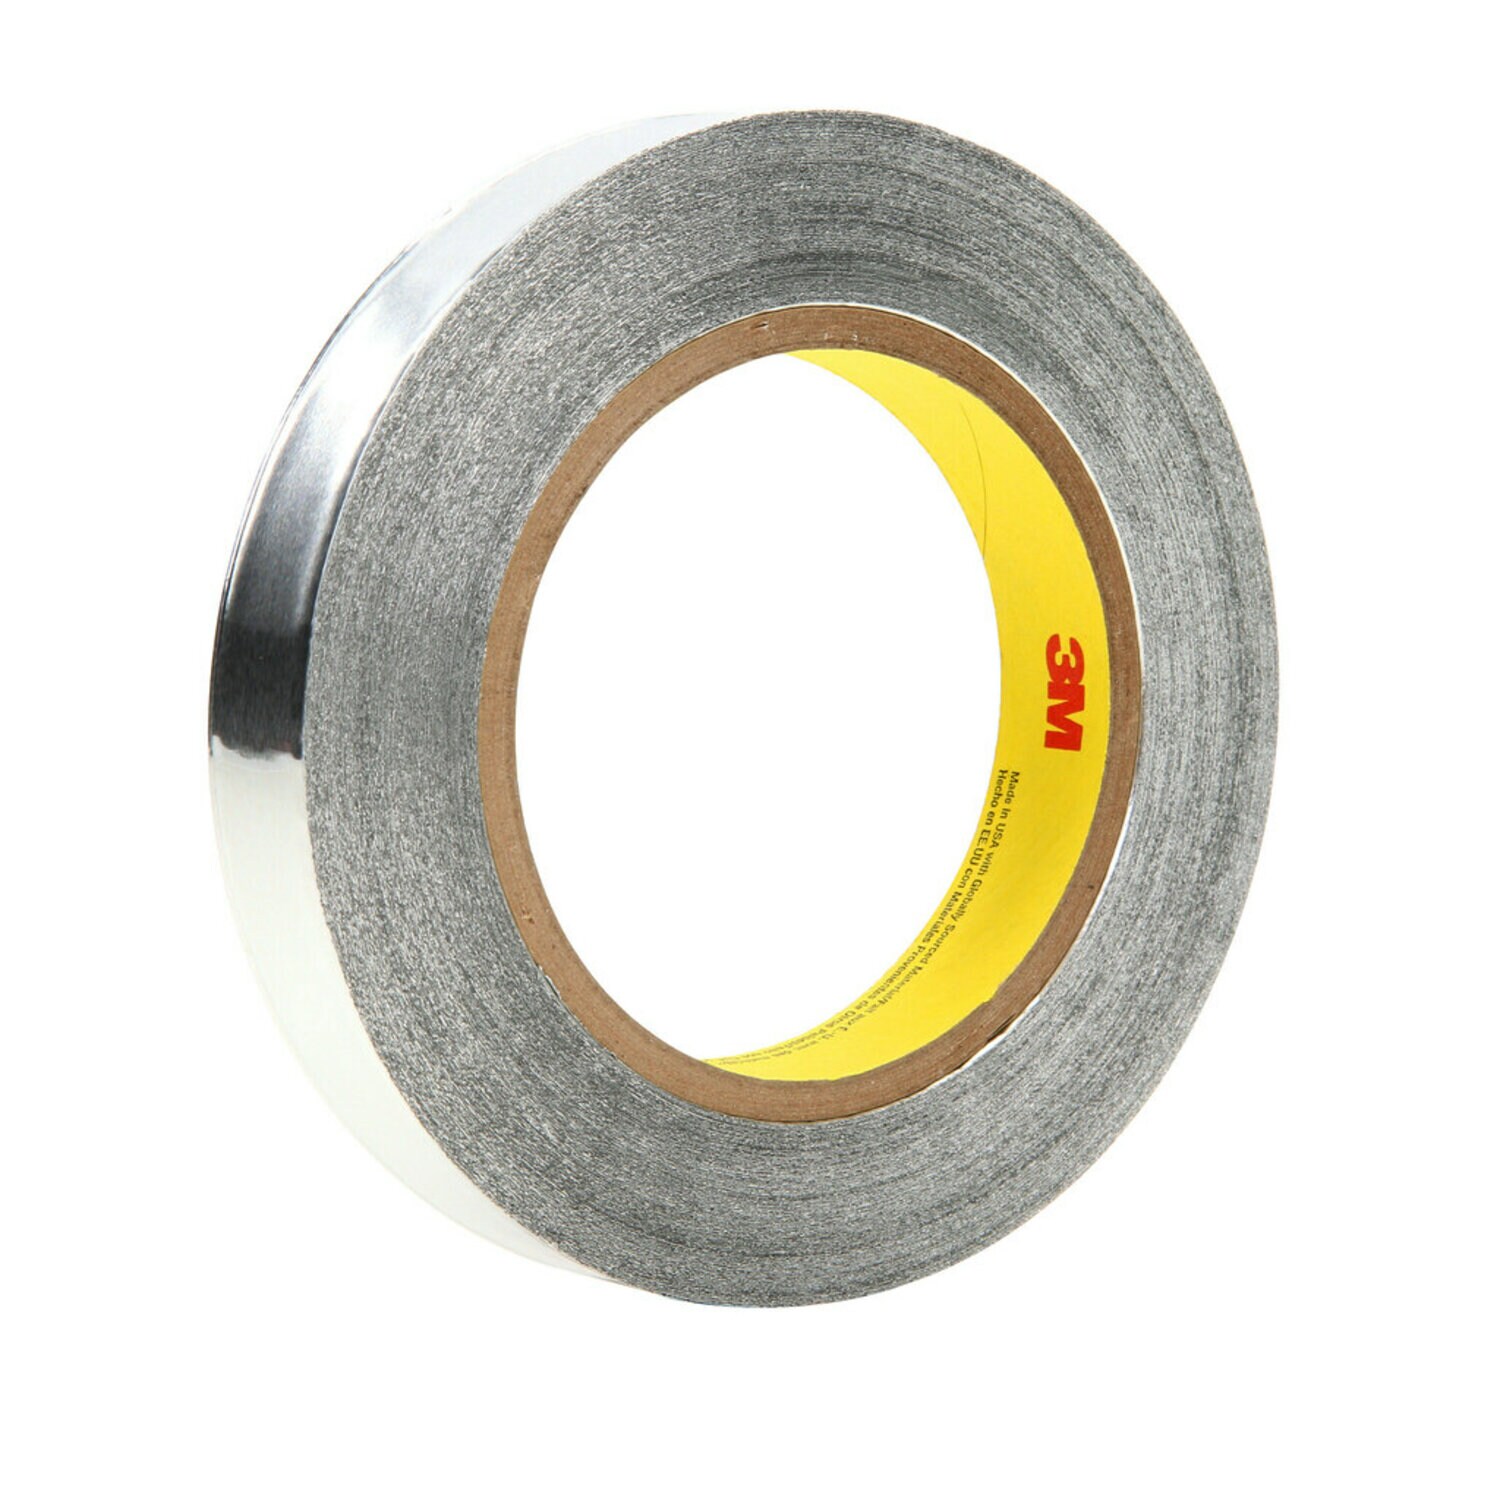 Low-temperature Tape for Frozen Containers - 1 / 25.4mm Wide